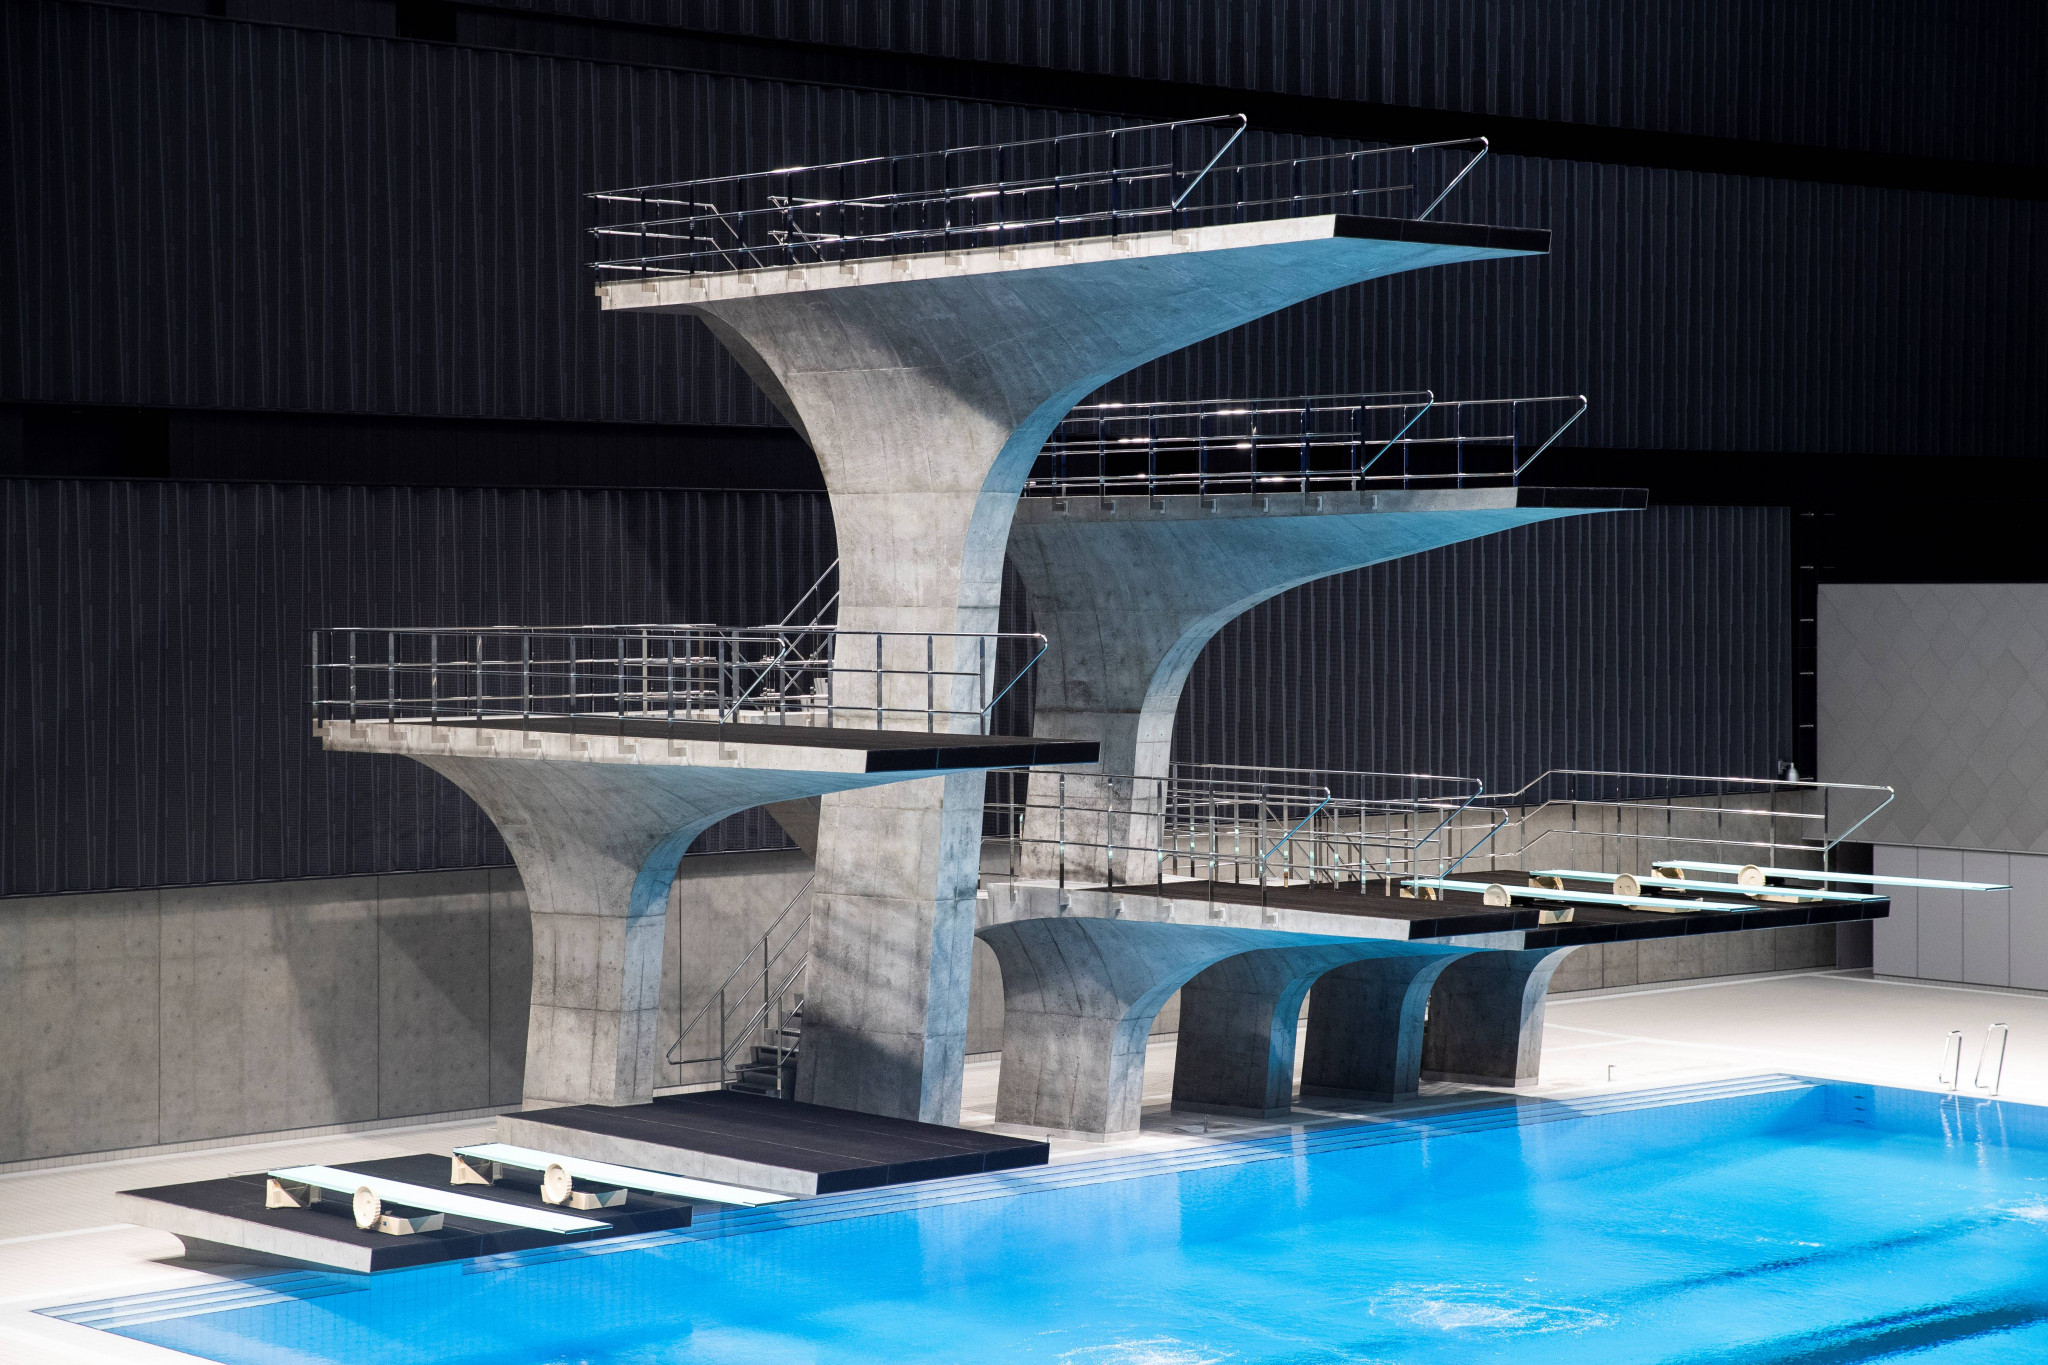 FINA Diving World Cup in Tokyo set to be called off over COVID-19 safety concerns